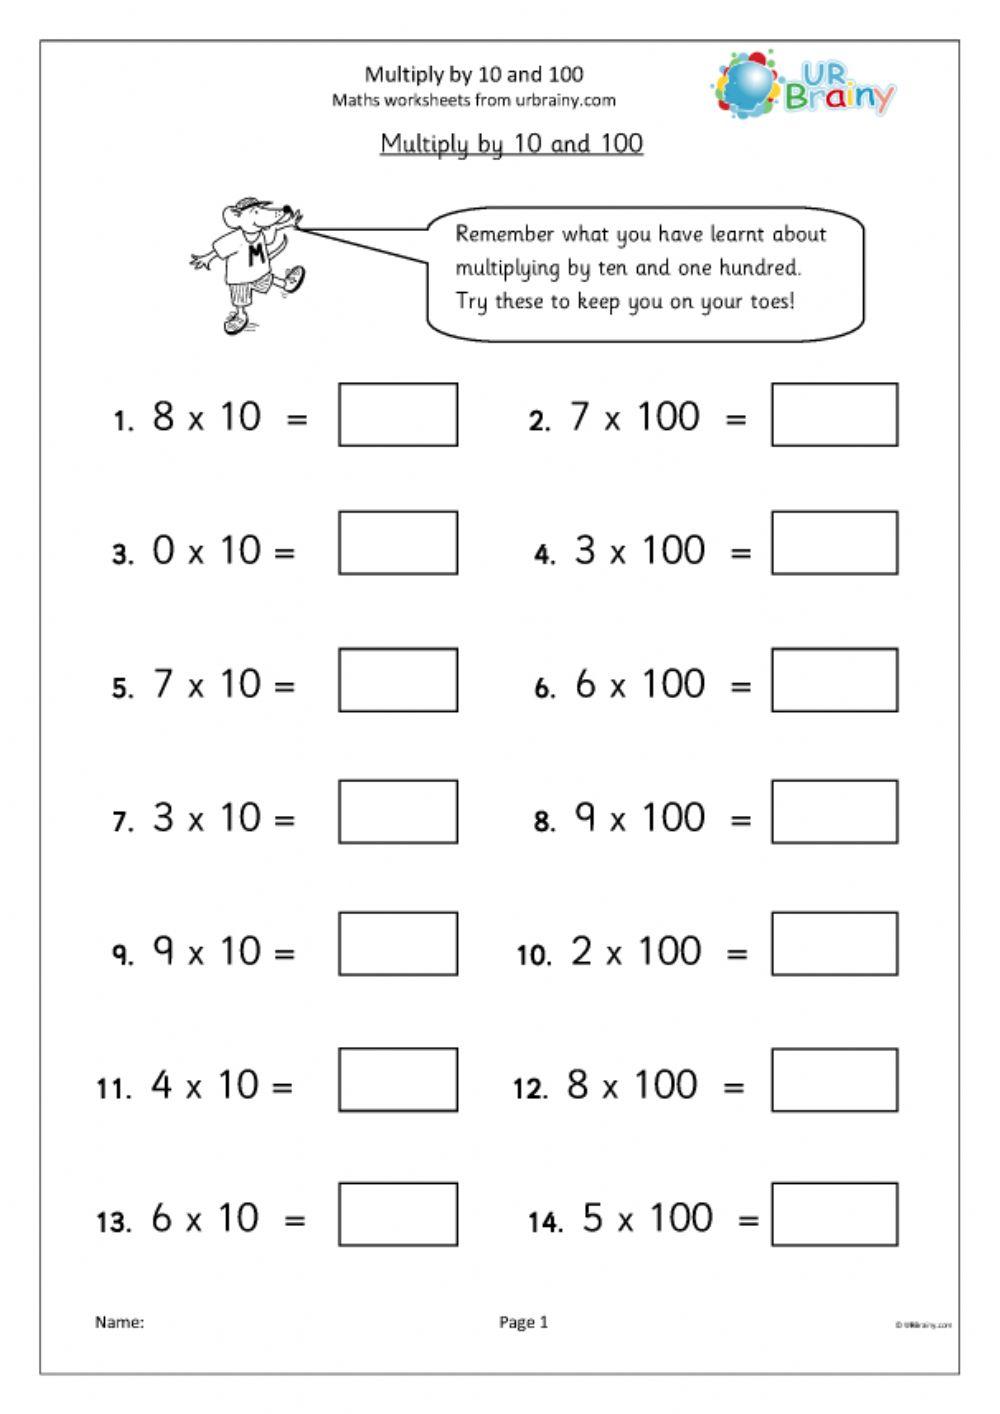 Multiplication by 10s and 100s